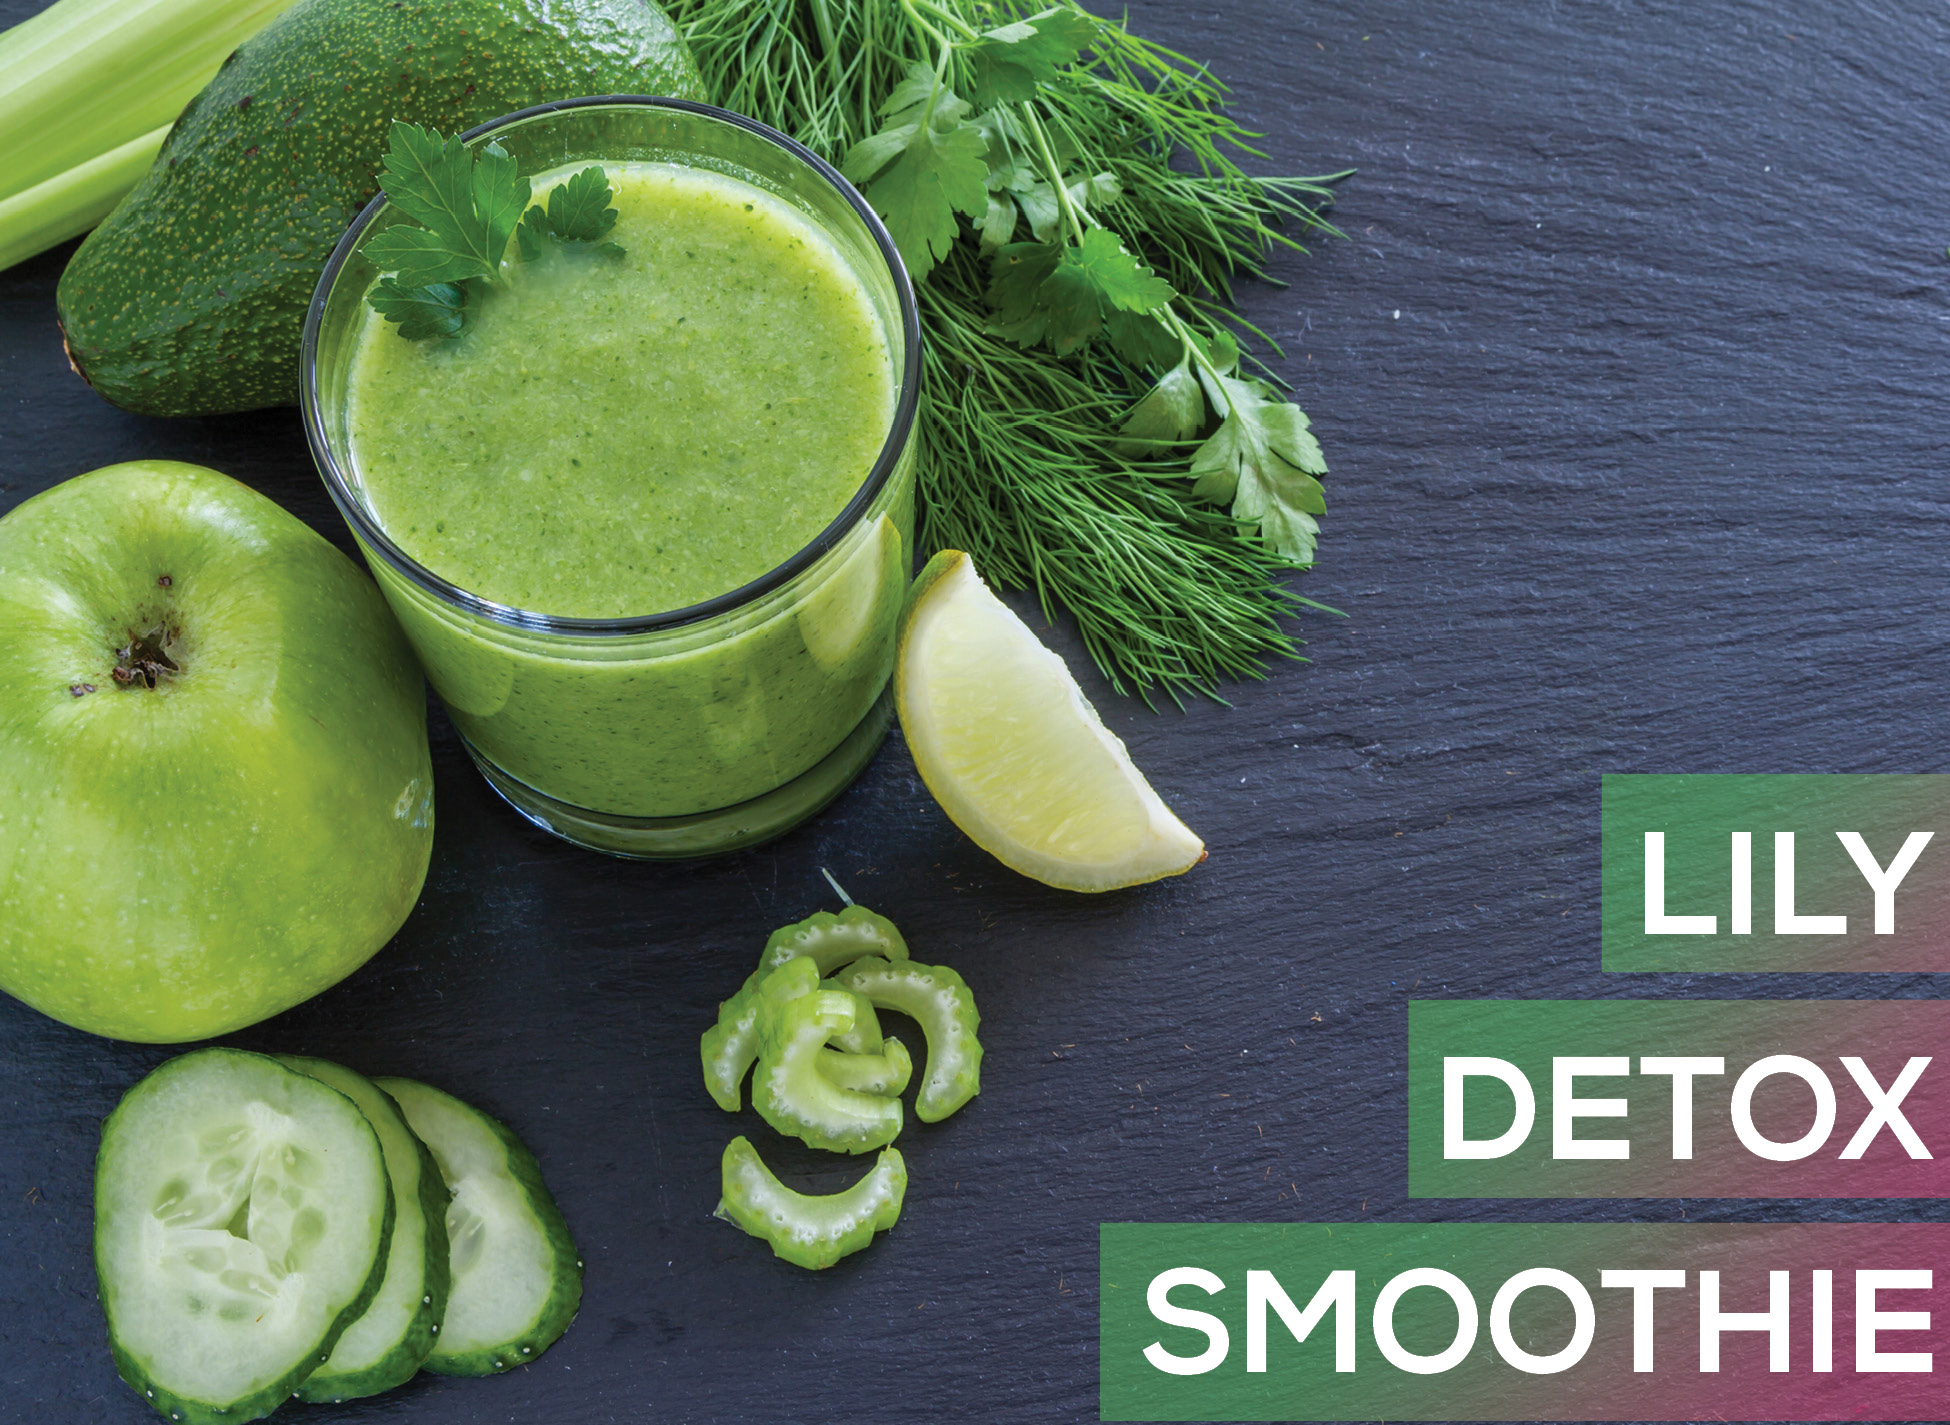 Holiday detox smoothie recipe - Lily of the Desert